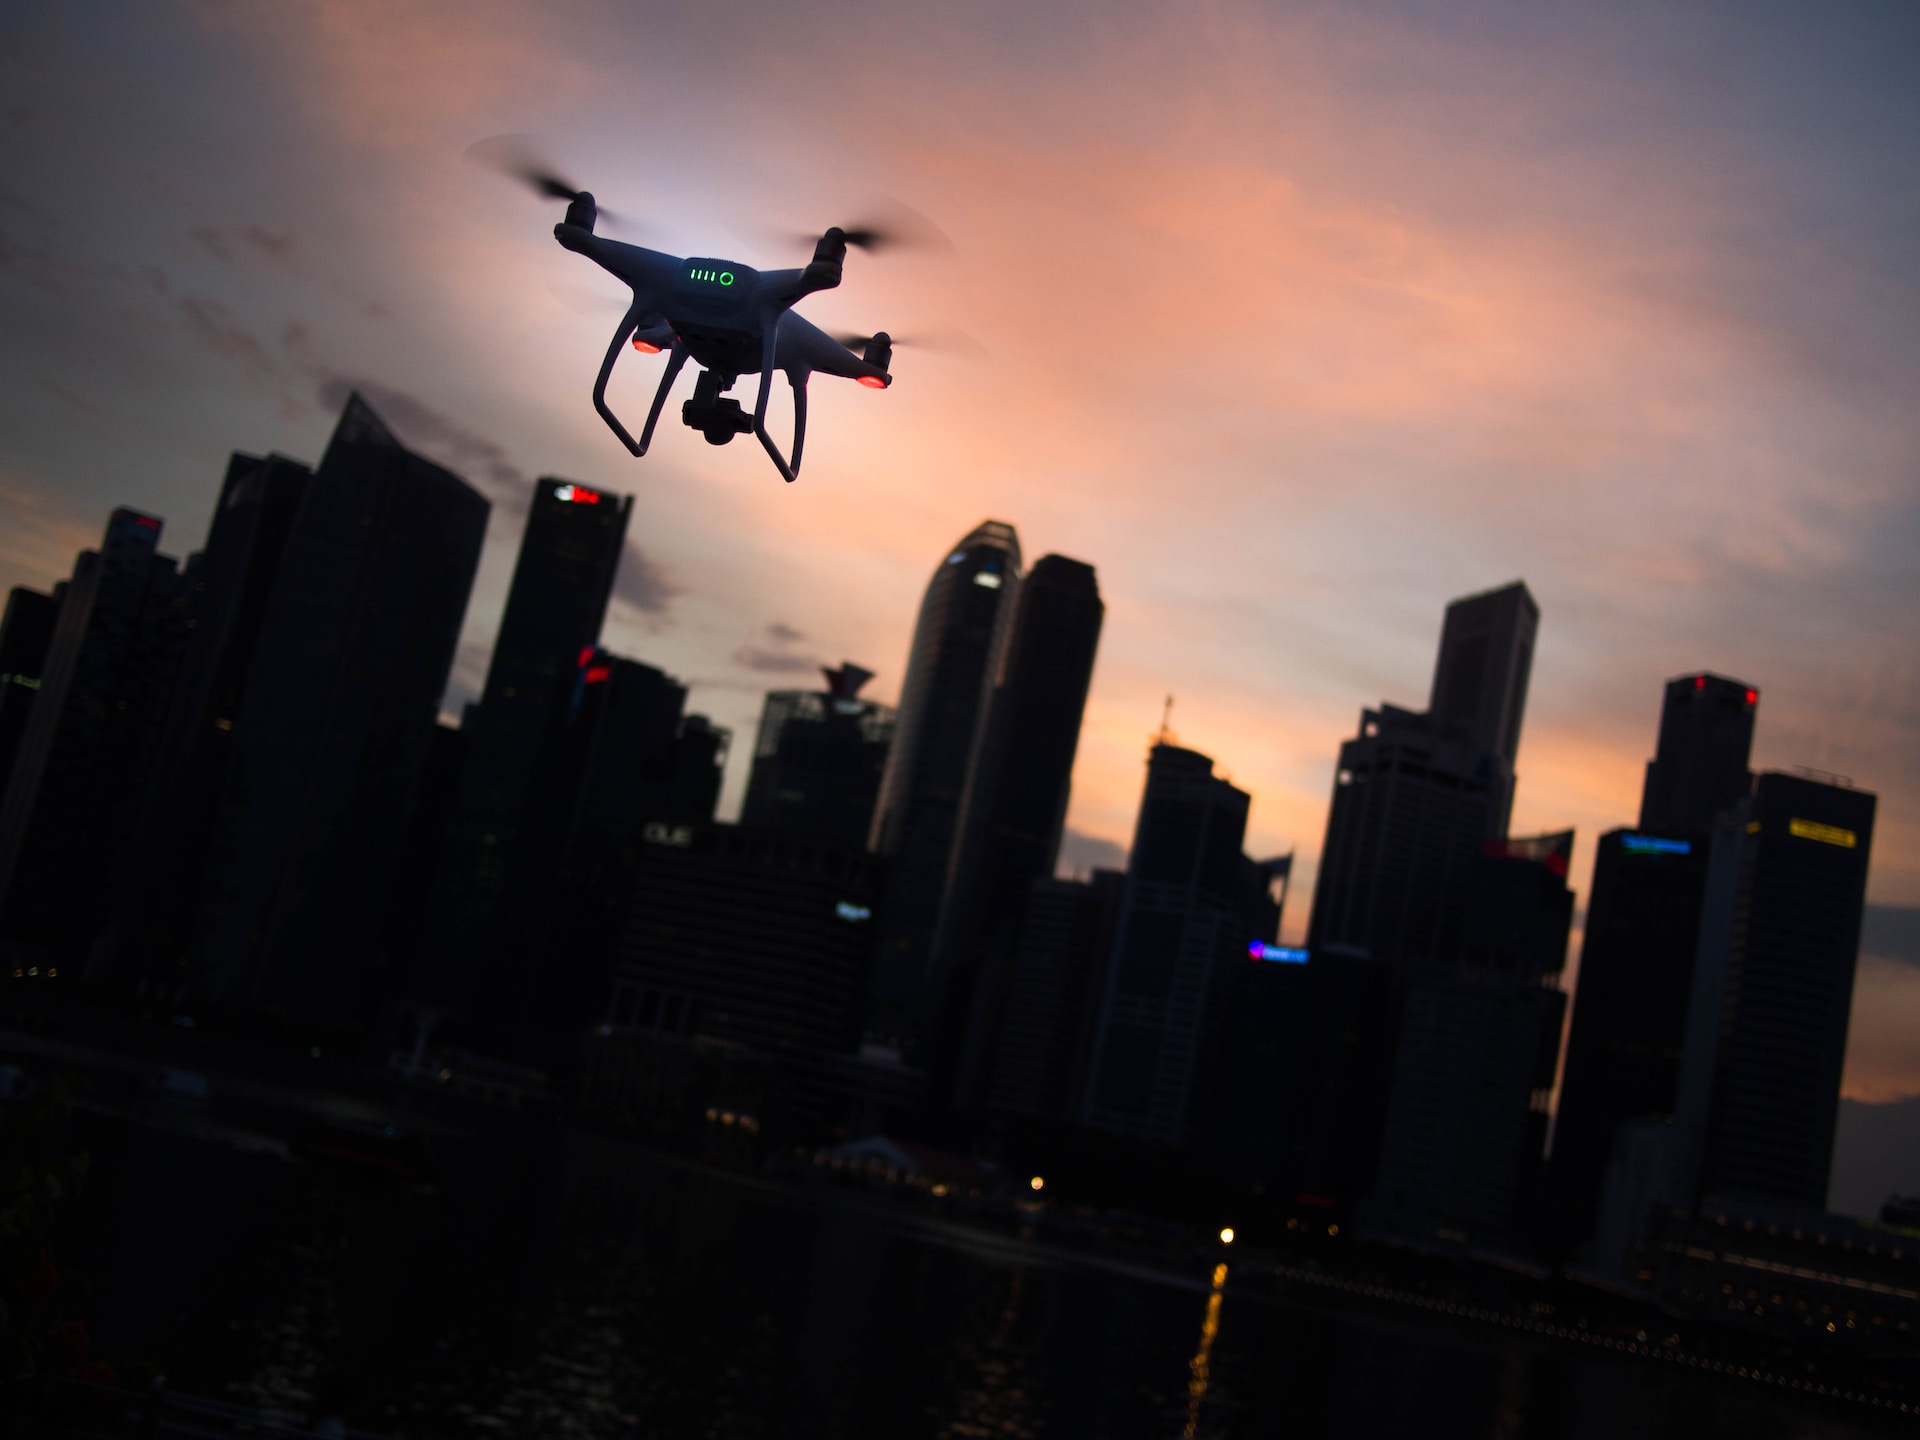 Eight innovative ways in which drones are already being used